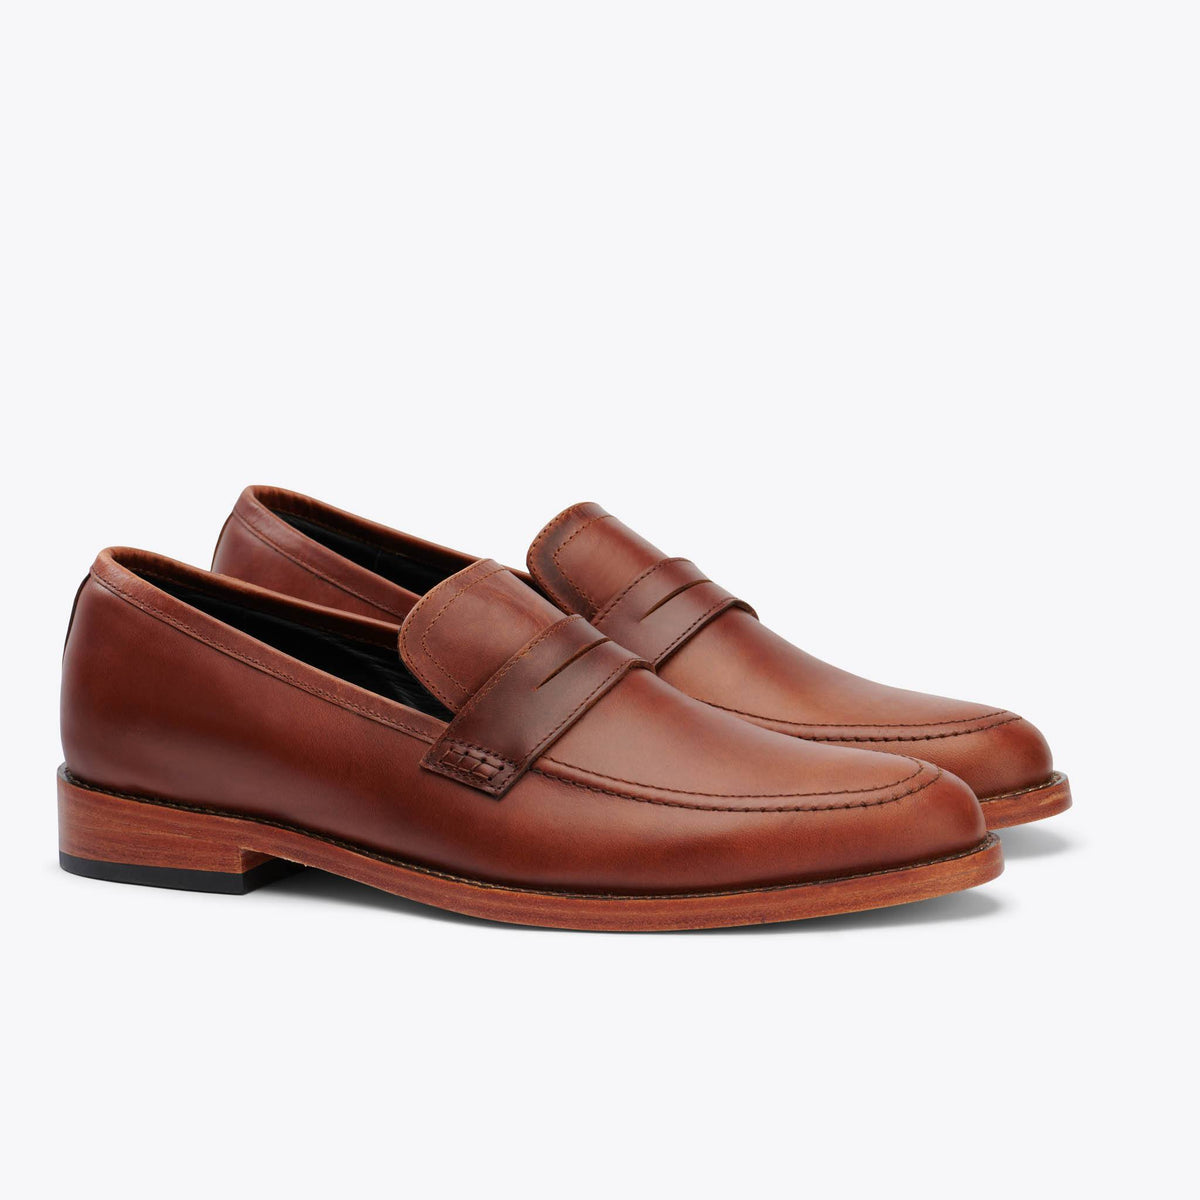 Men's Penny Loafer | Handcrafted & Ethically Made | Nisolo